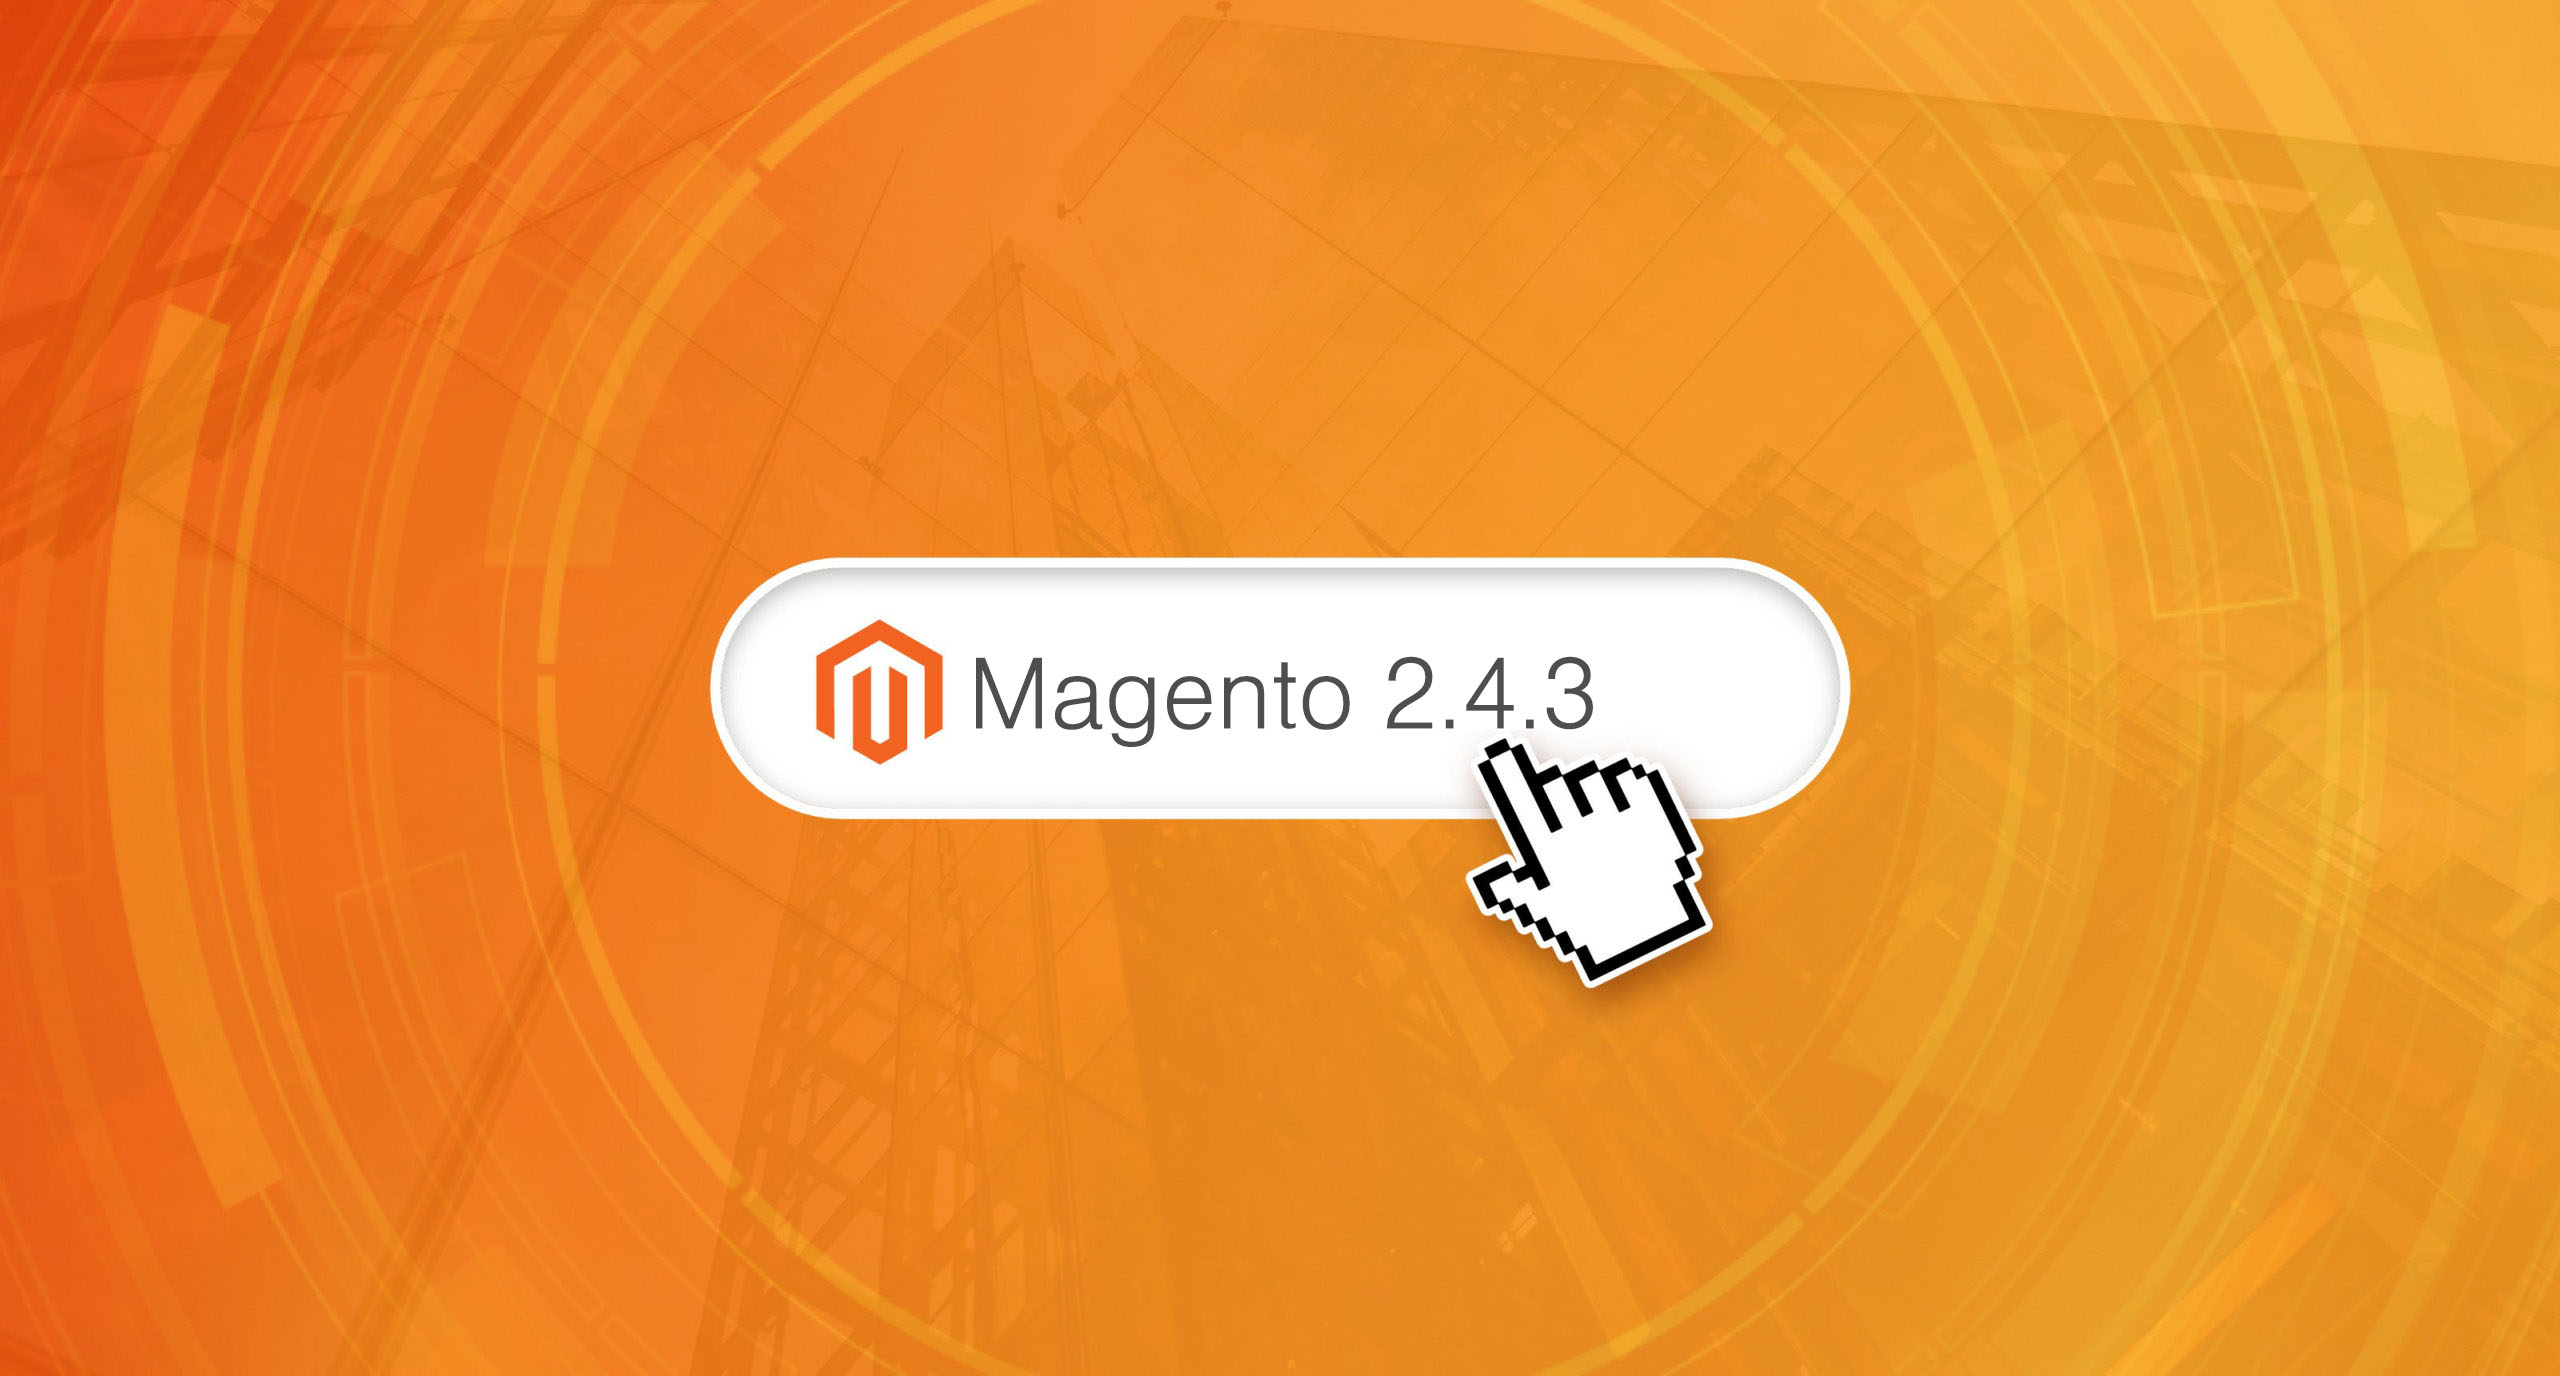 What’s New In Adobe Commerce (Magento) 2.4.3?